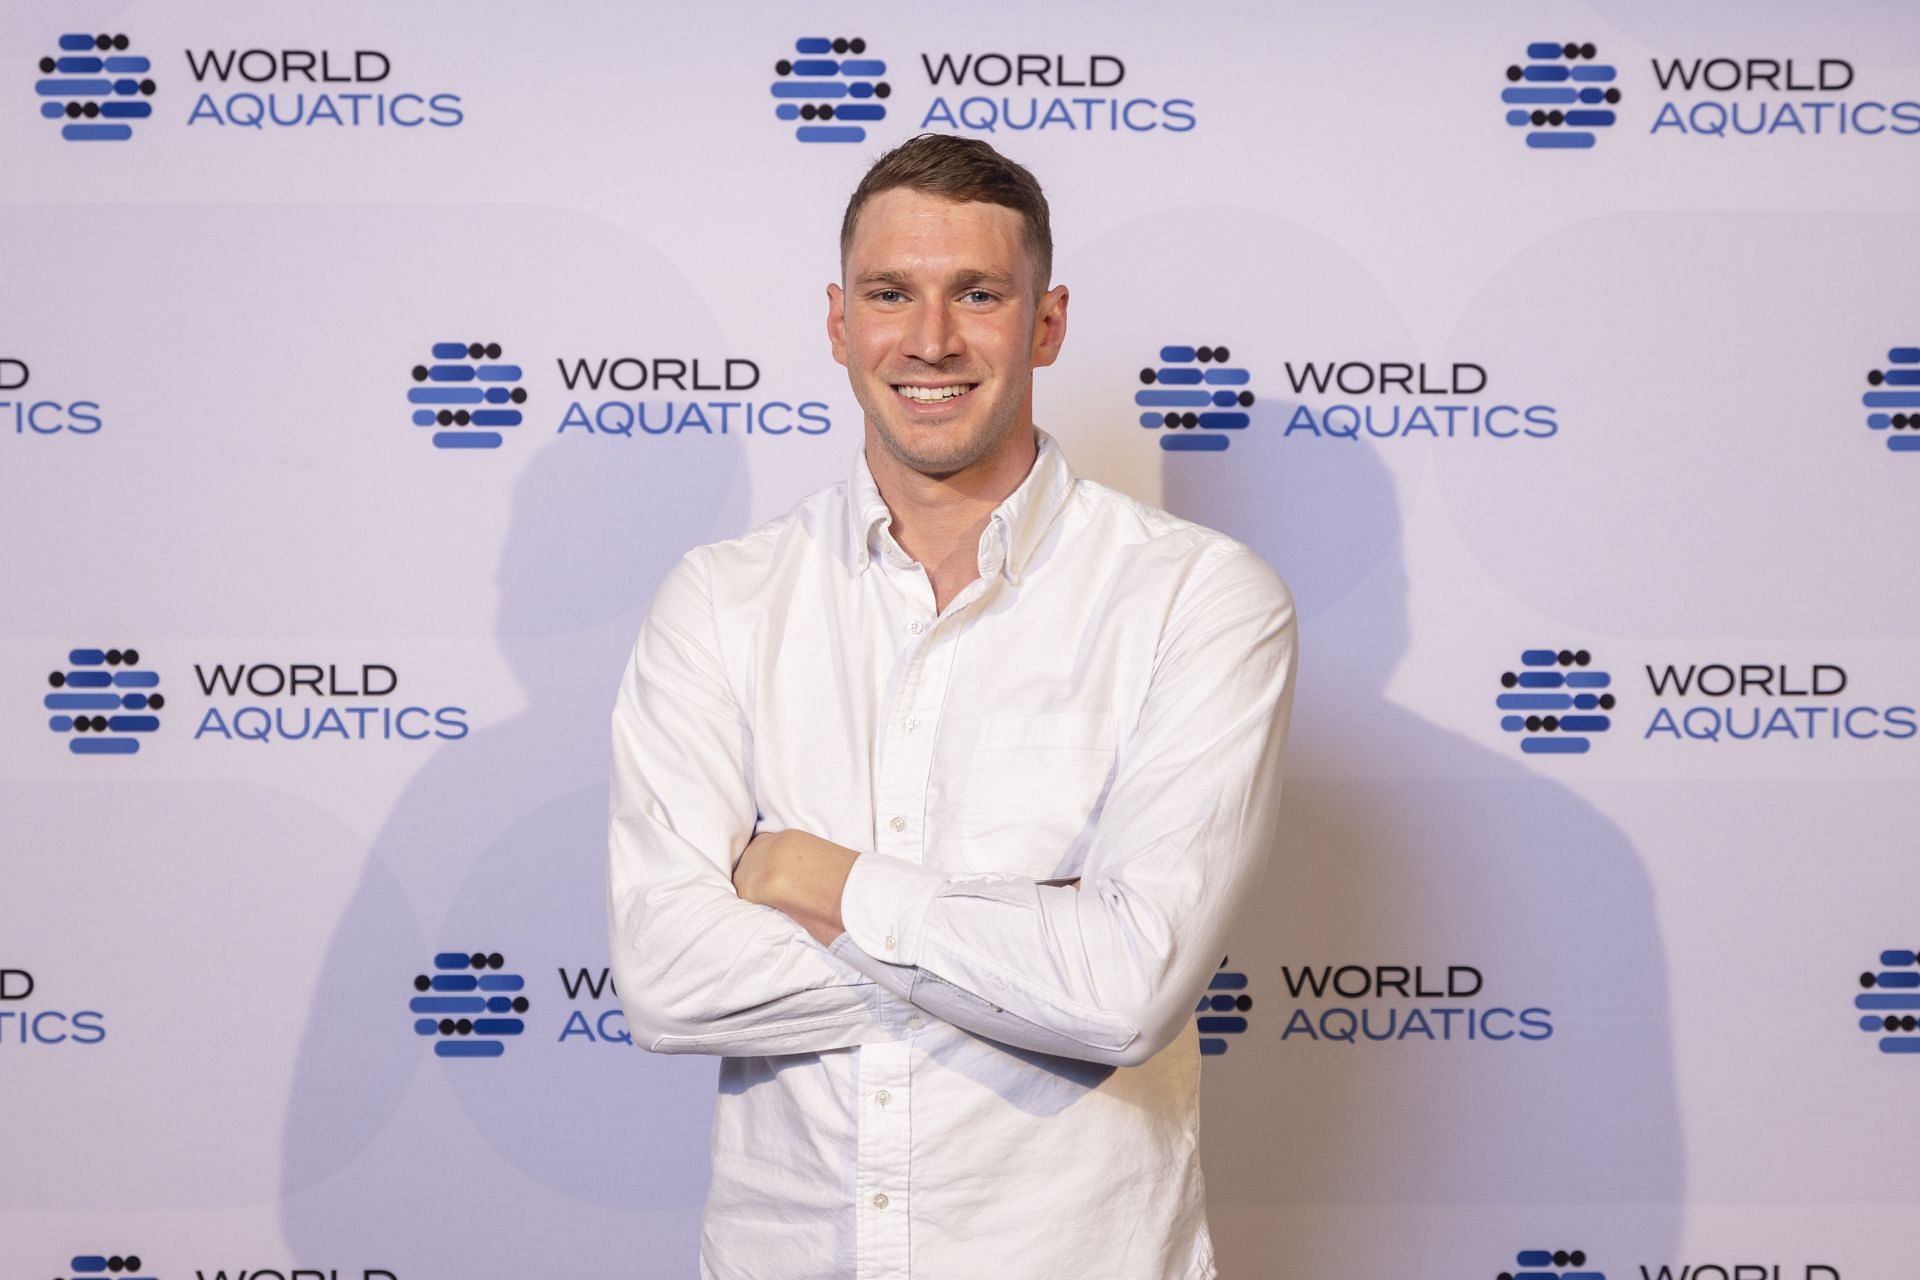 Ryan Murphy during a FINA Sponsorship and new name Announcement at LUME on December 12, 2022, in Melbourne, Australia (Photo by Wayne Taylor/Getty Images for FINA)